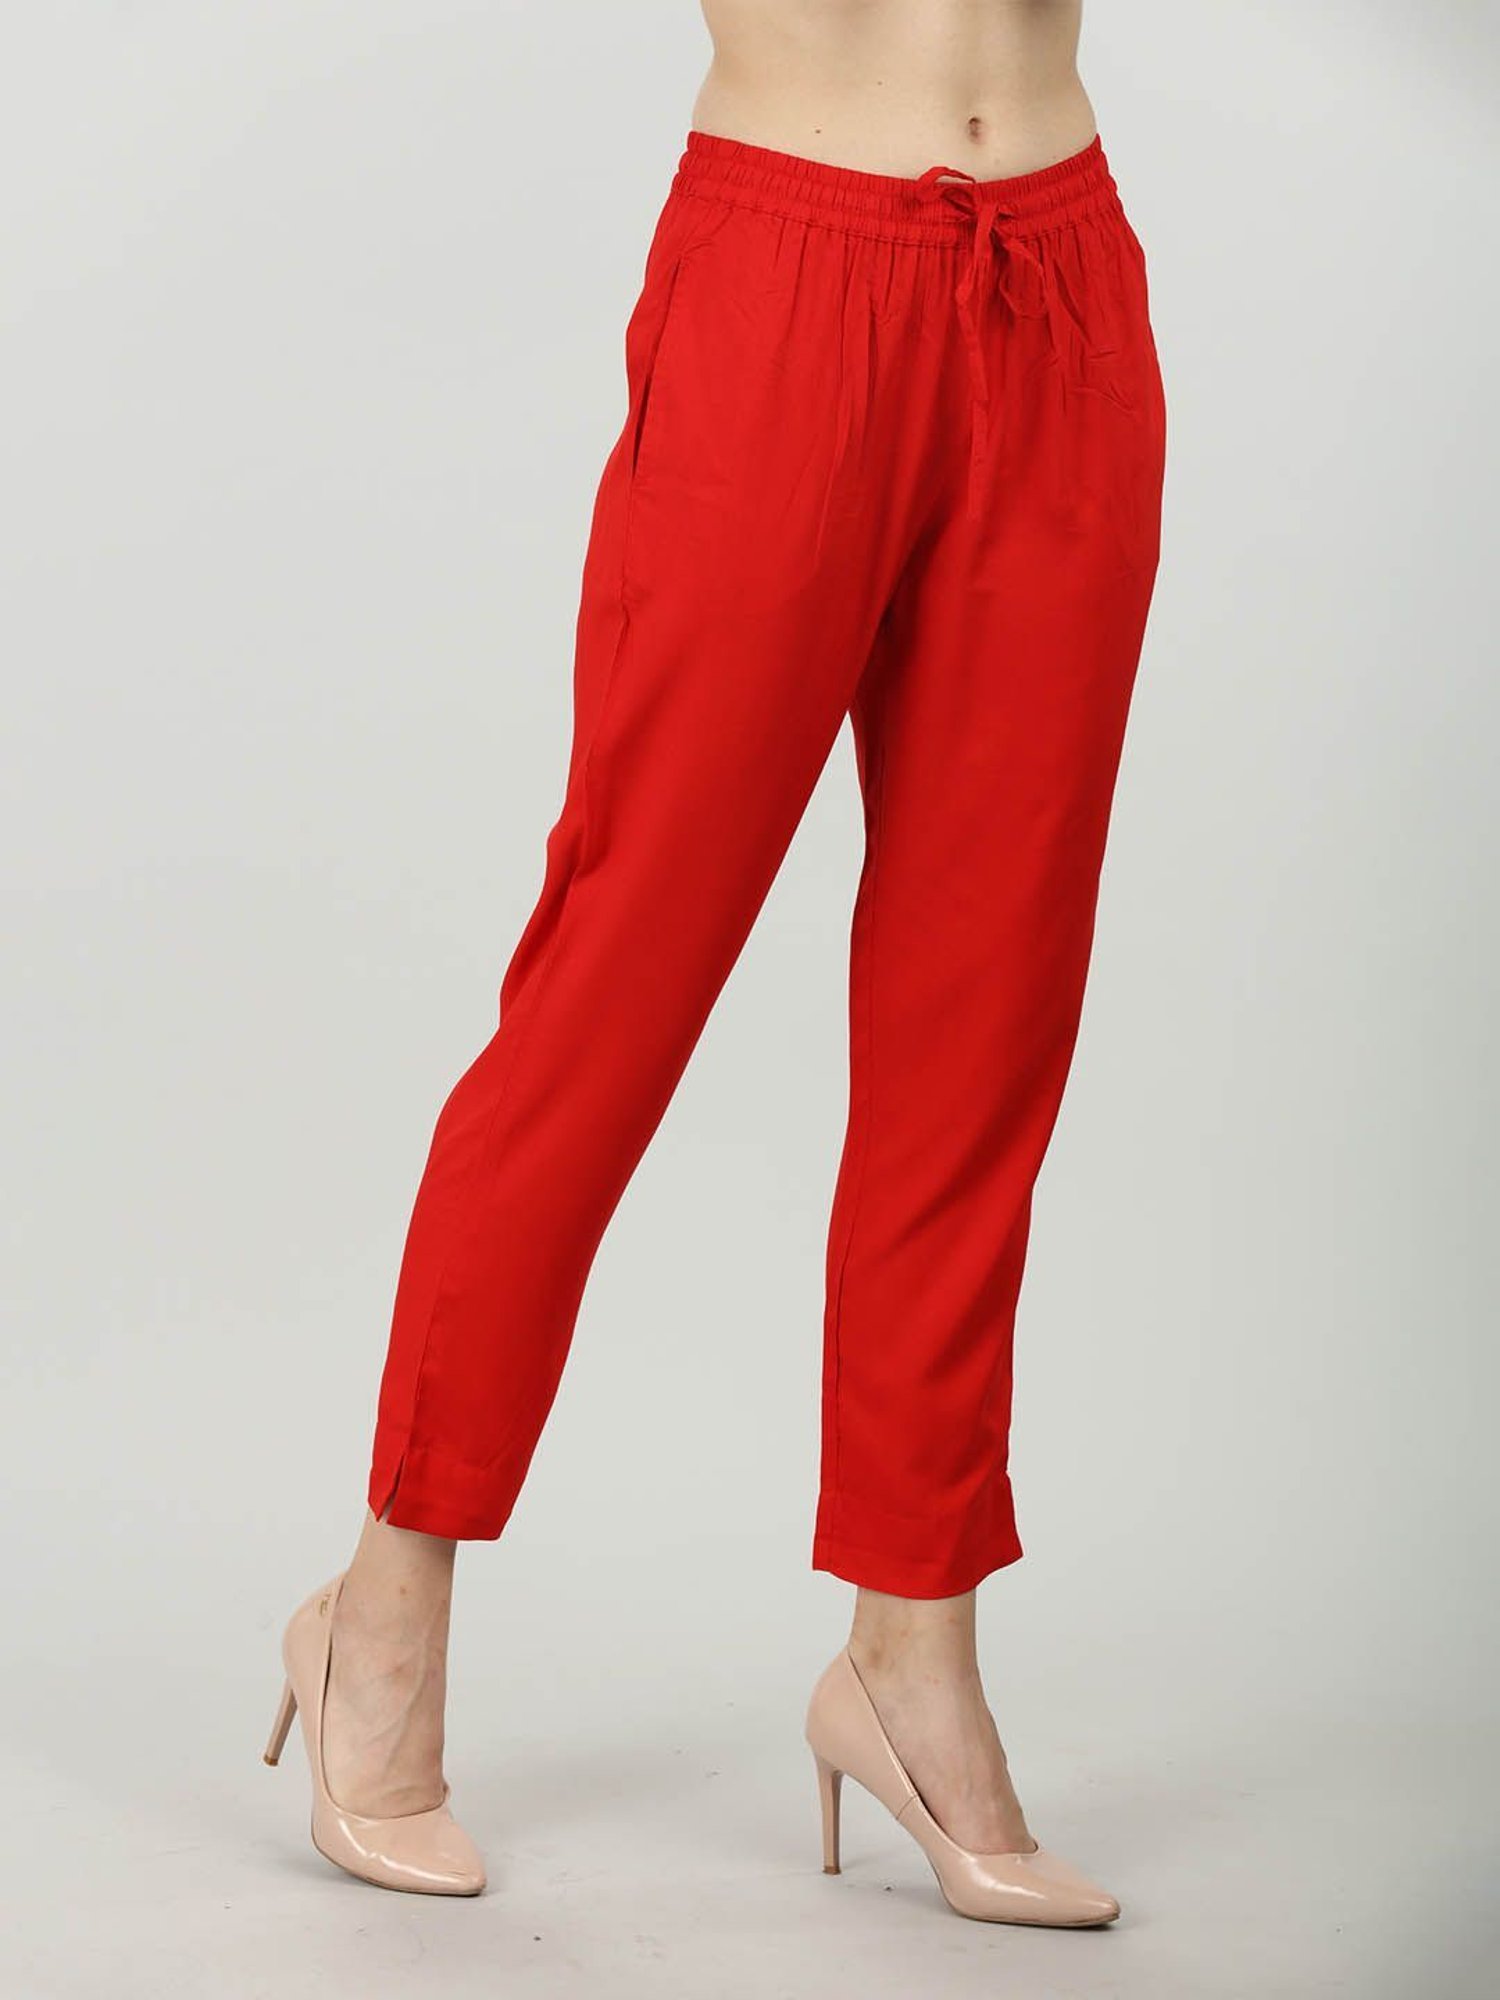 Buy Ladies Red Linen Trousers With Elasticated Waist and Belt, Women's  Loose Fit Wide Leg Linen Pants With Pockets, Ladies Summer Linen Clothes  Online in India - Etsy